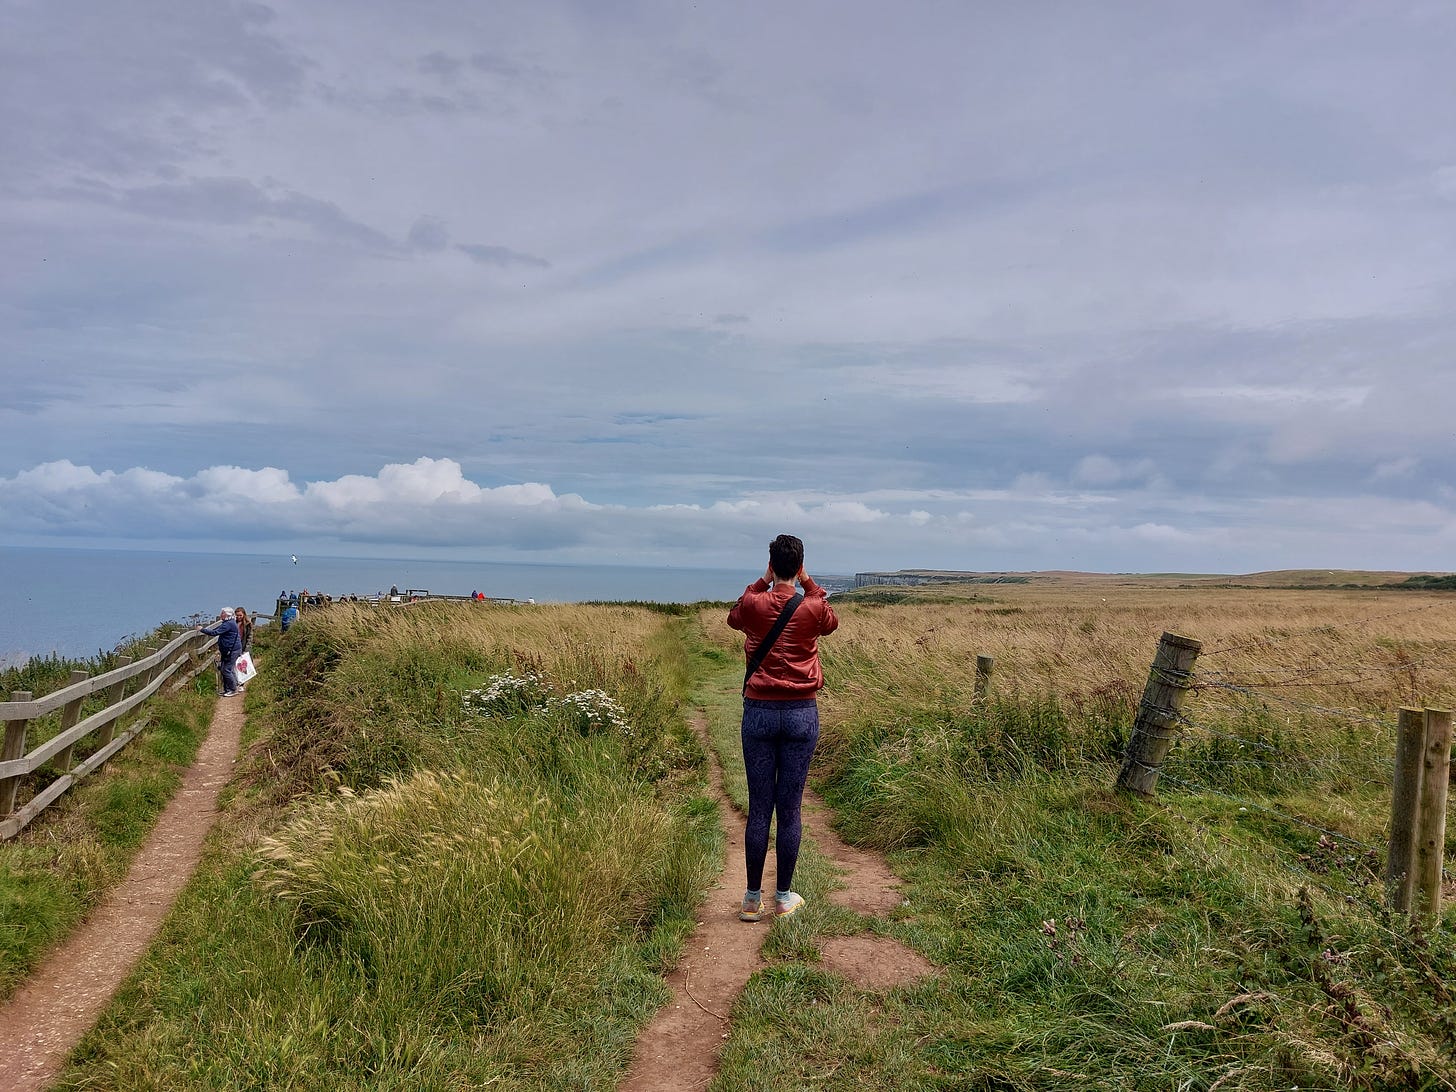 A wide shot taken from behind a white lady with short brown hair. She is standing holding her hands to her face because she's looking through binoculars at Bempton Cliffs. The sky is grey-blue and the sea is just visible. The terrain is straw coloured grass